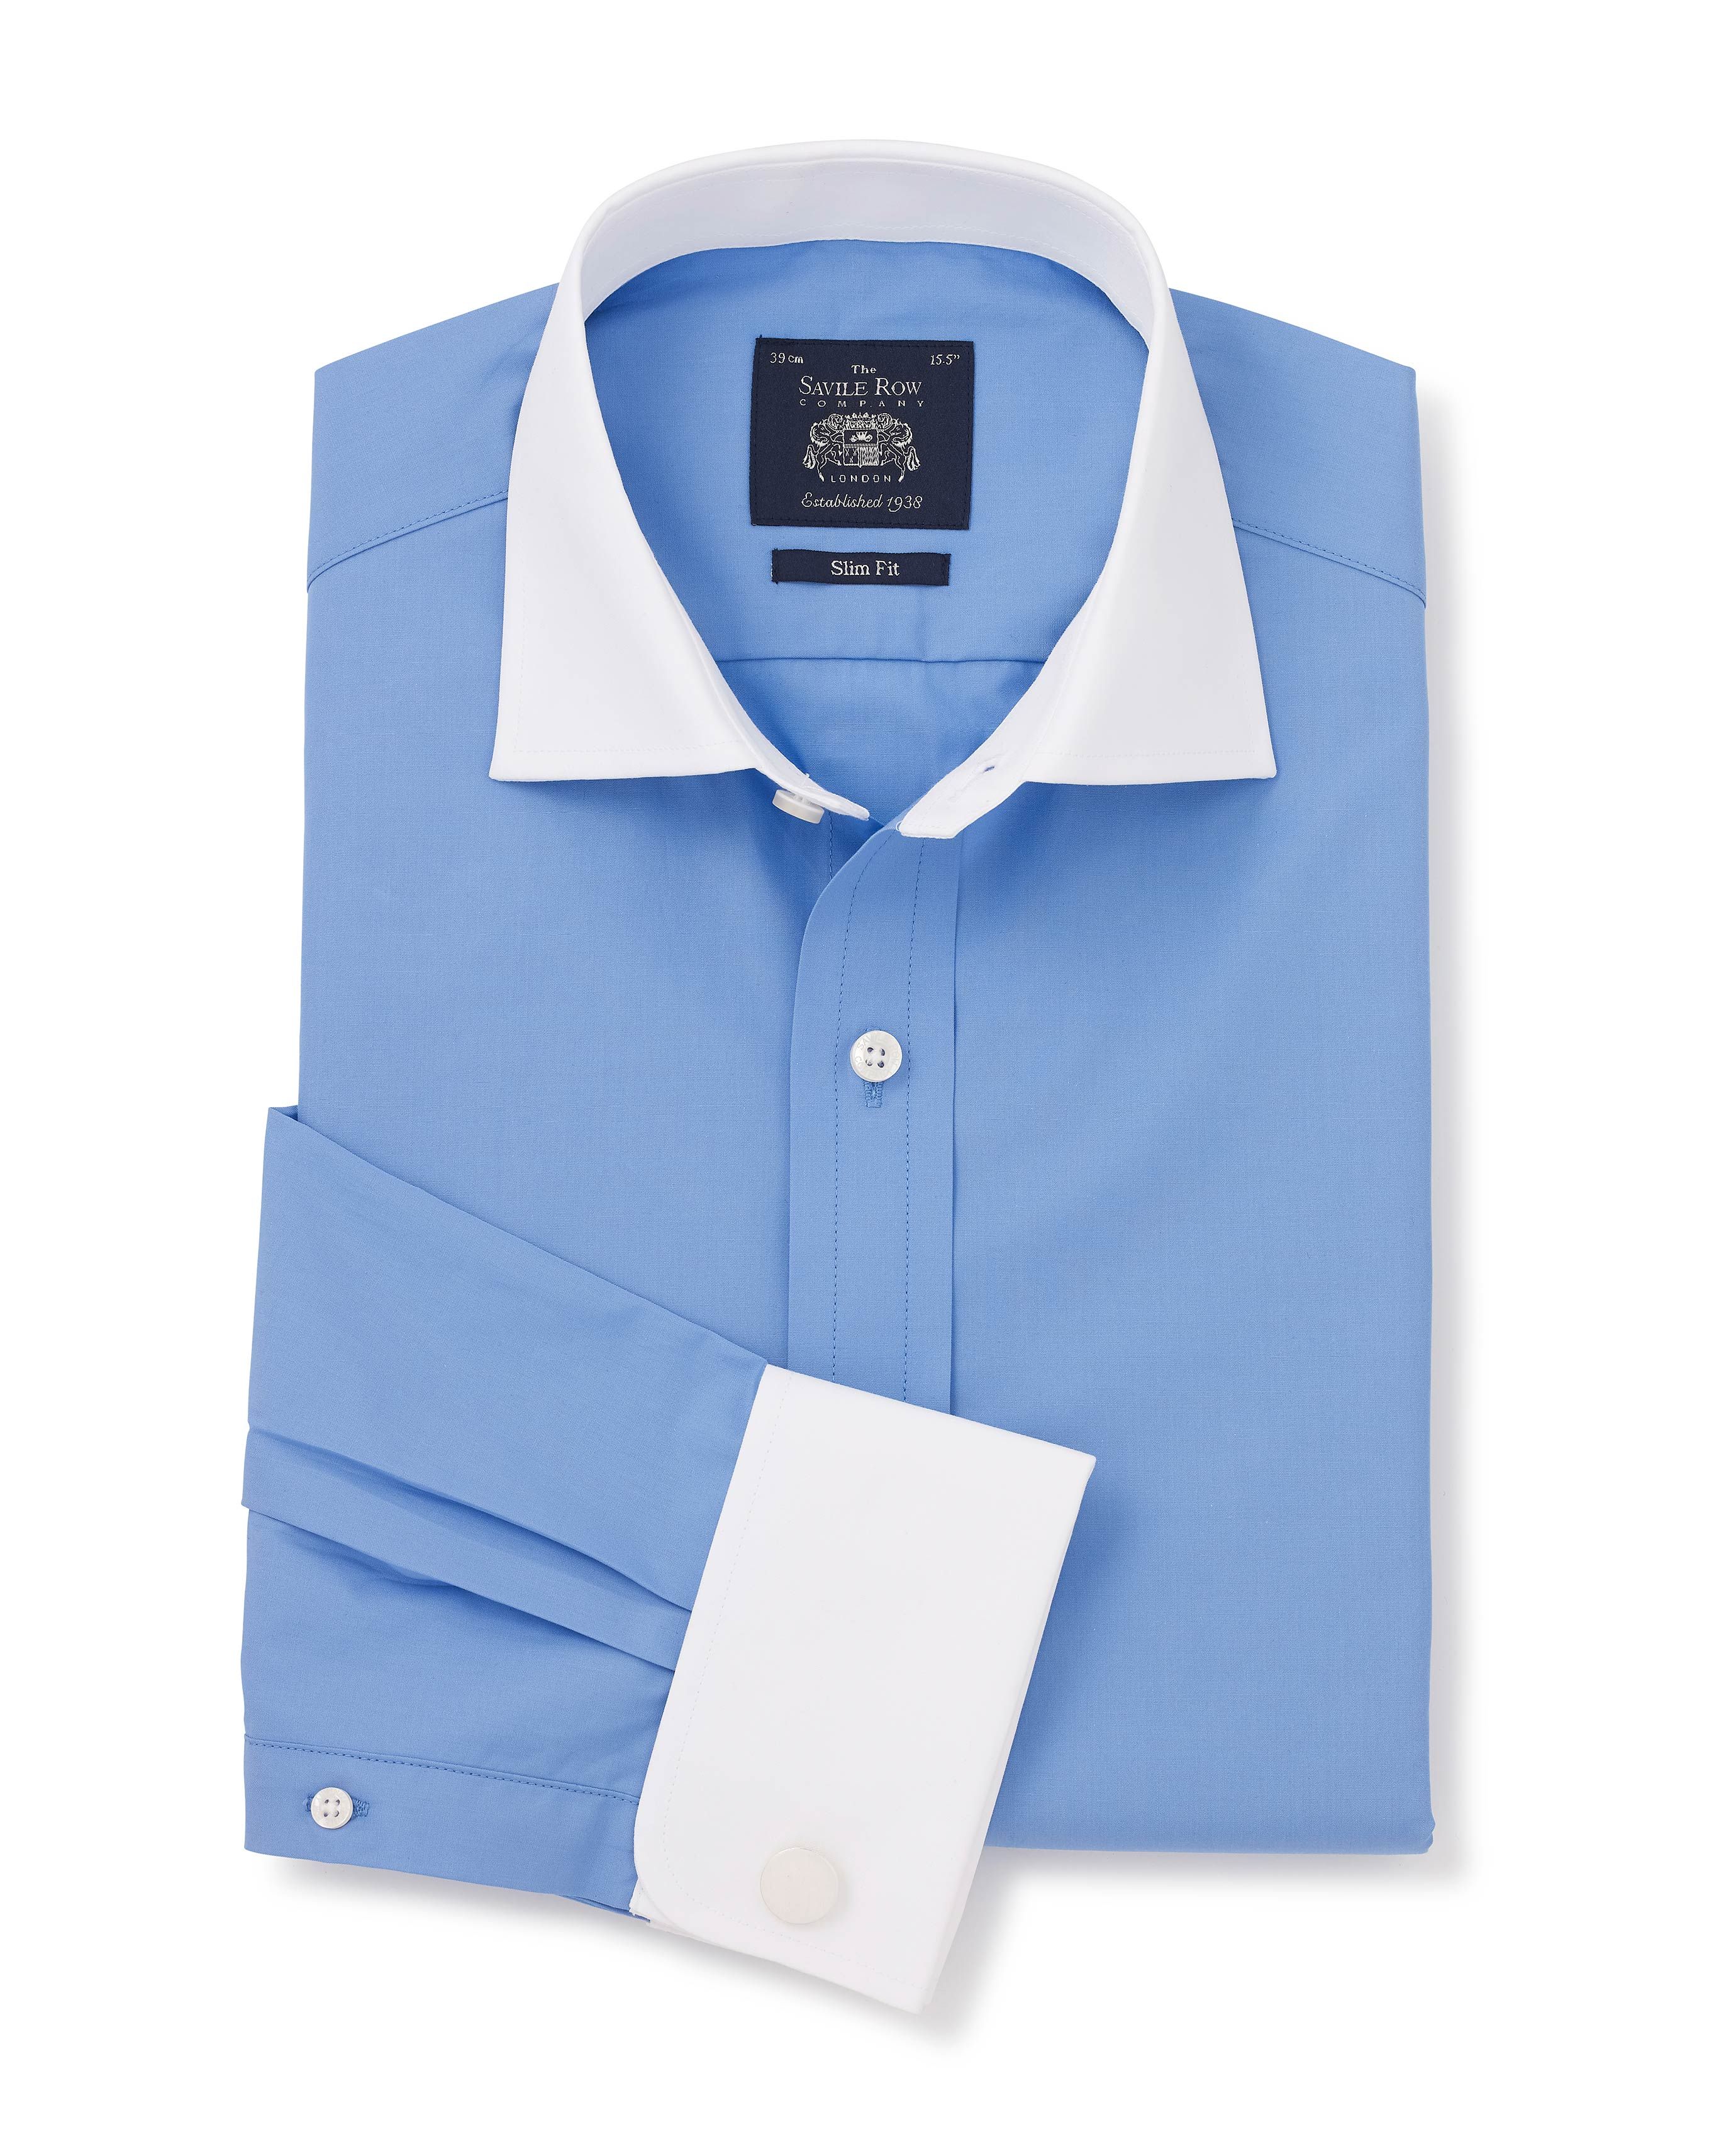 Mens Blue Slim Fit Shirt With White Collar | Savile Row Co